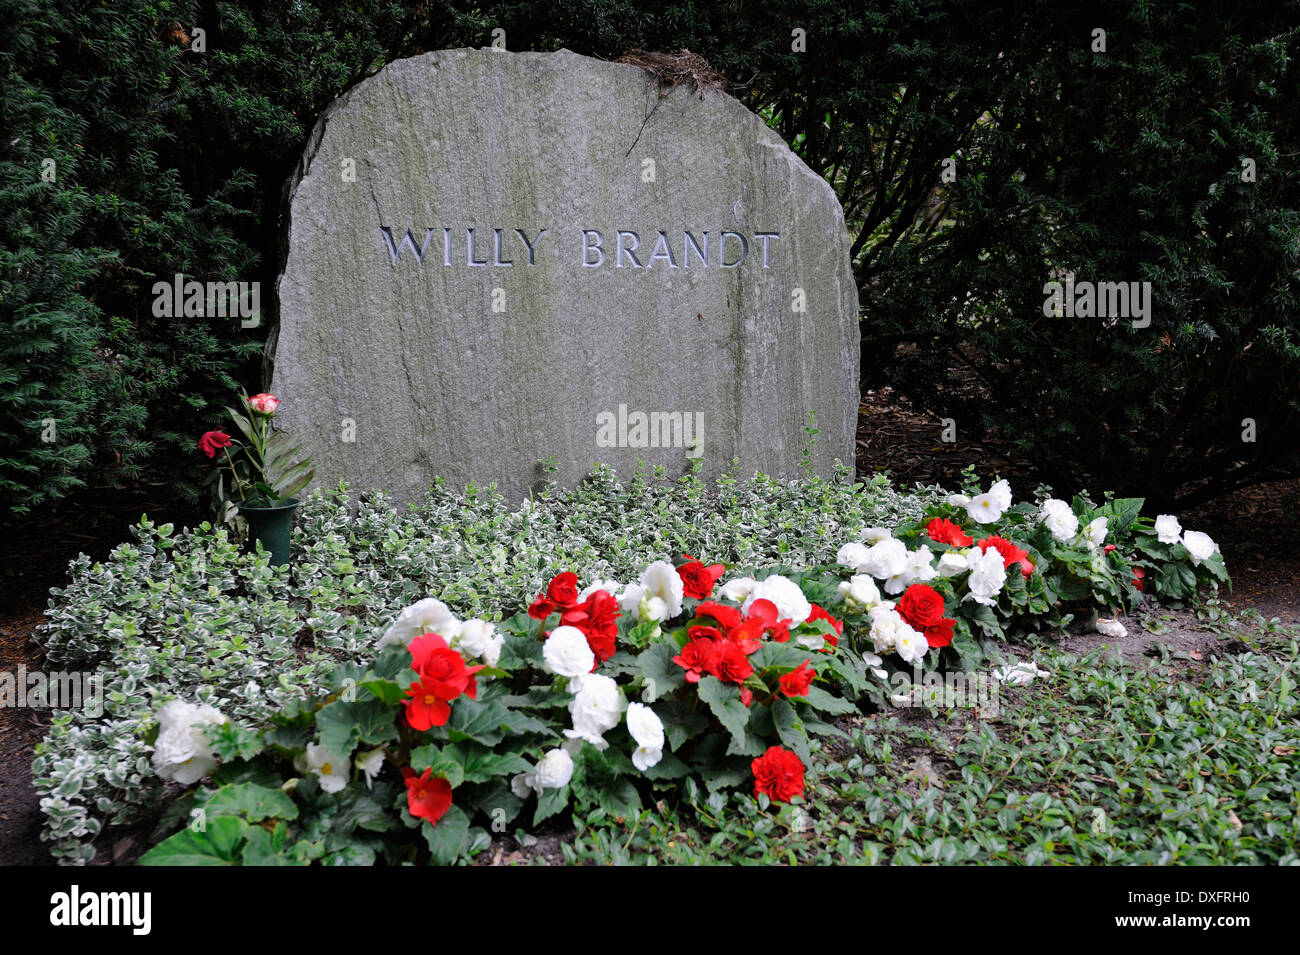 Honorary grave of Willy Brandt, Chancellor, Waldfriedhof Zehlendorf cemetery, Berlin, Germany Stock Photo